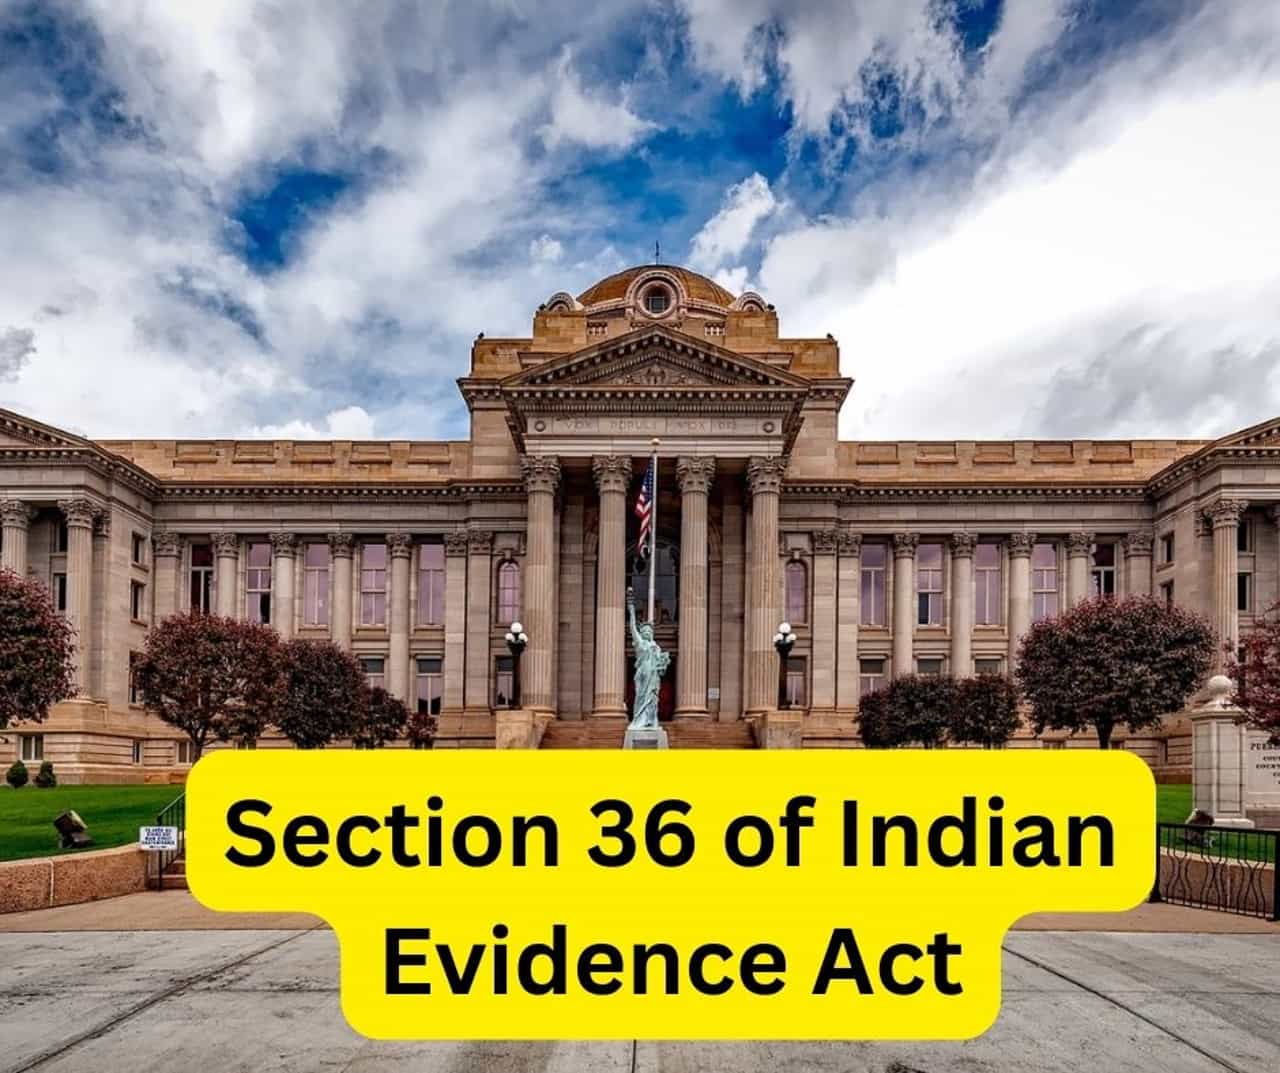 Section 36 of Indian Evidence Act